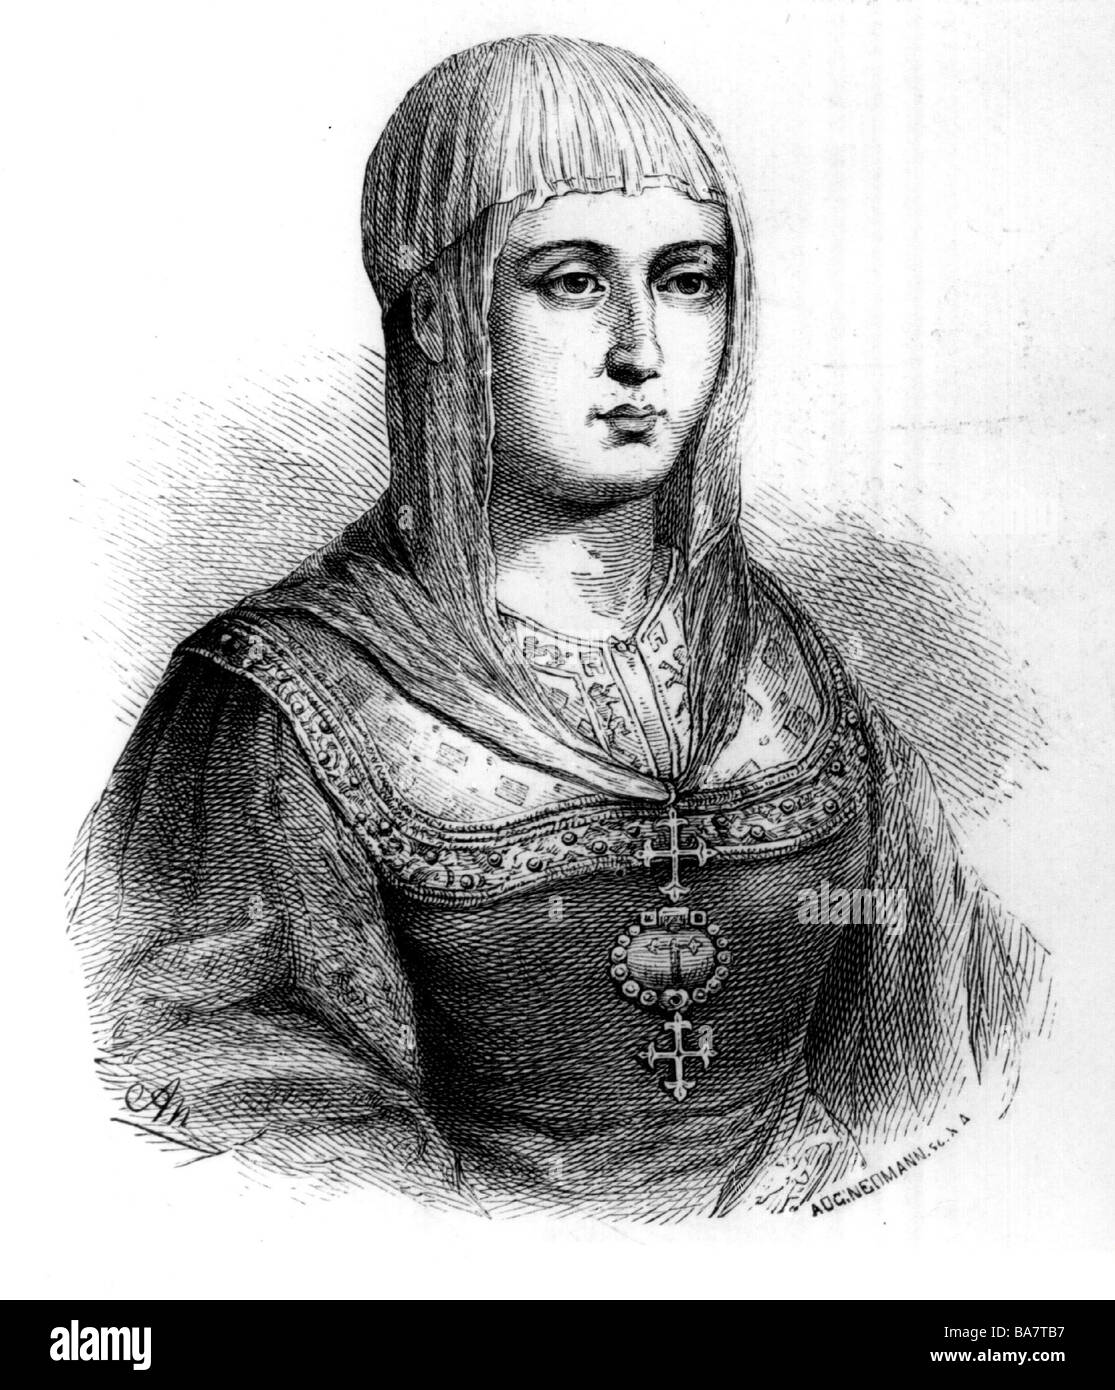 Isabella I, 22.4.1451 - 26.11.1504, Queen of Castile 1474 - 1504, portrait, wood engraving, by Adolf Neumann, Stock Photo